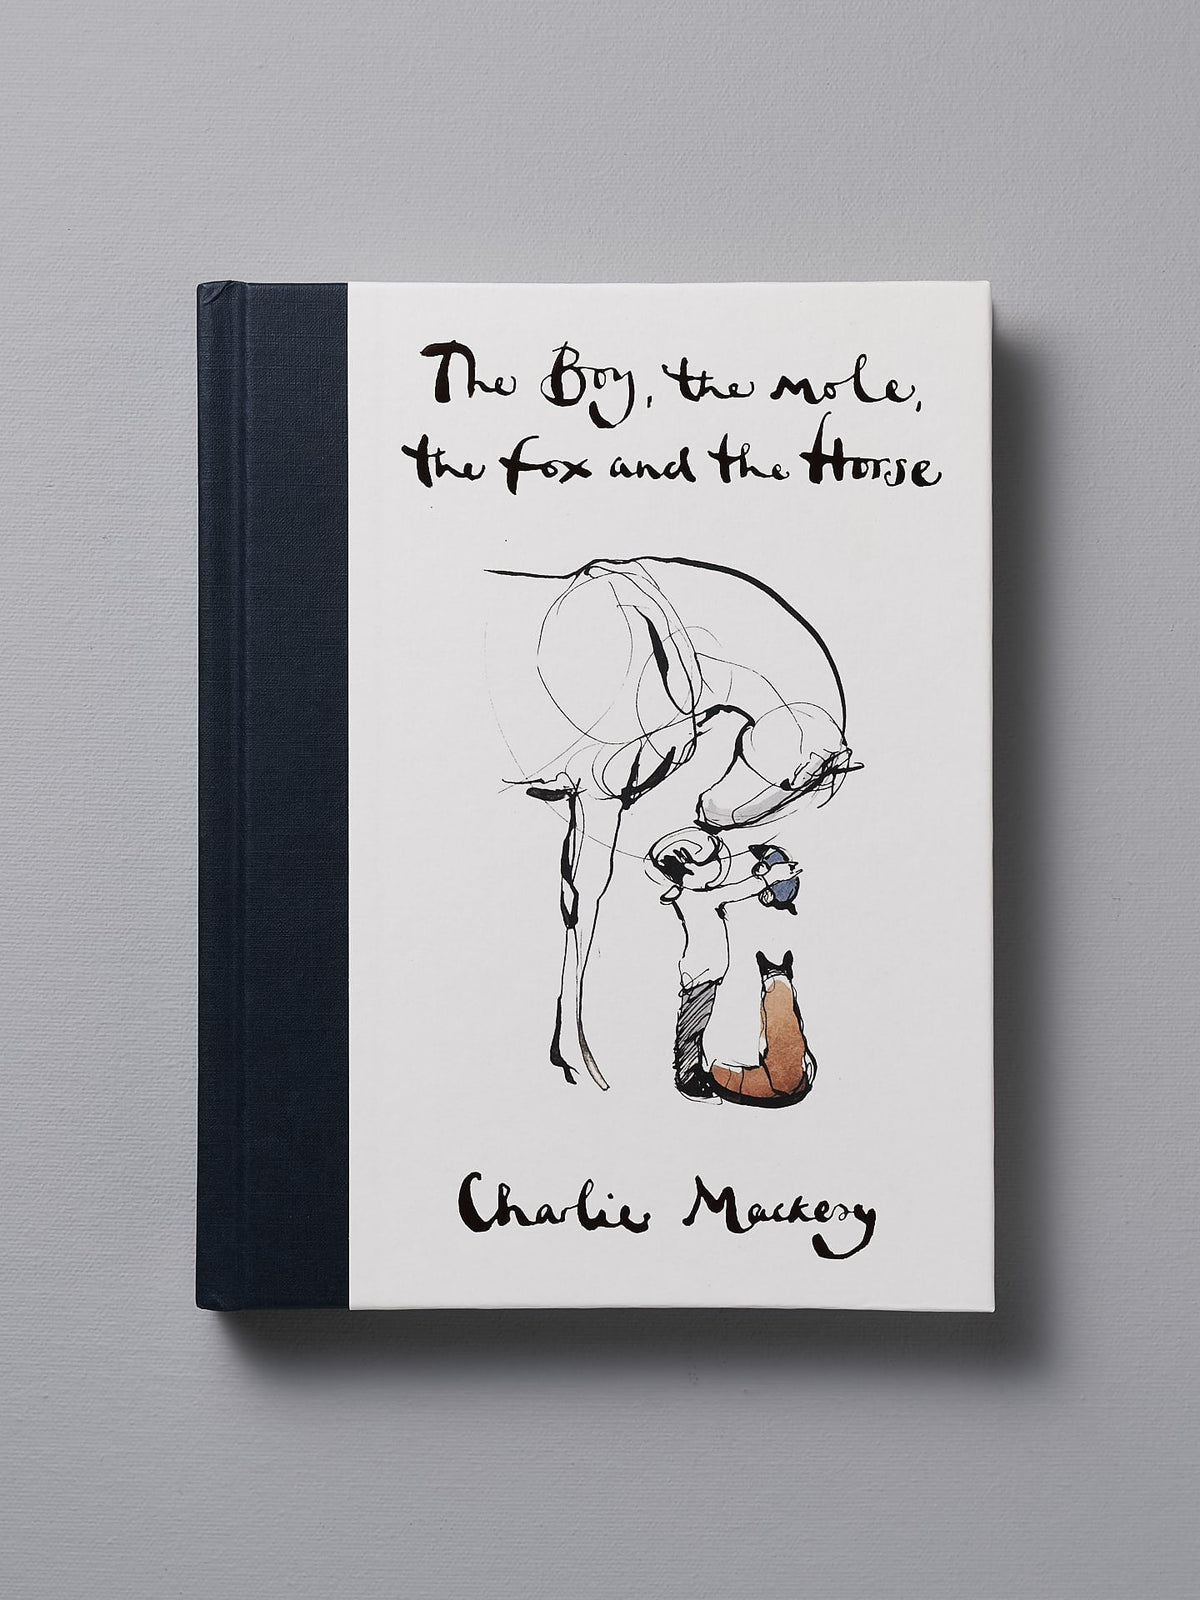 A &quot;The Boy, the Mole, the Fox and the Horse&quot; by Charlie Mackesy with a picture of a horse and a dog.